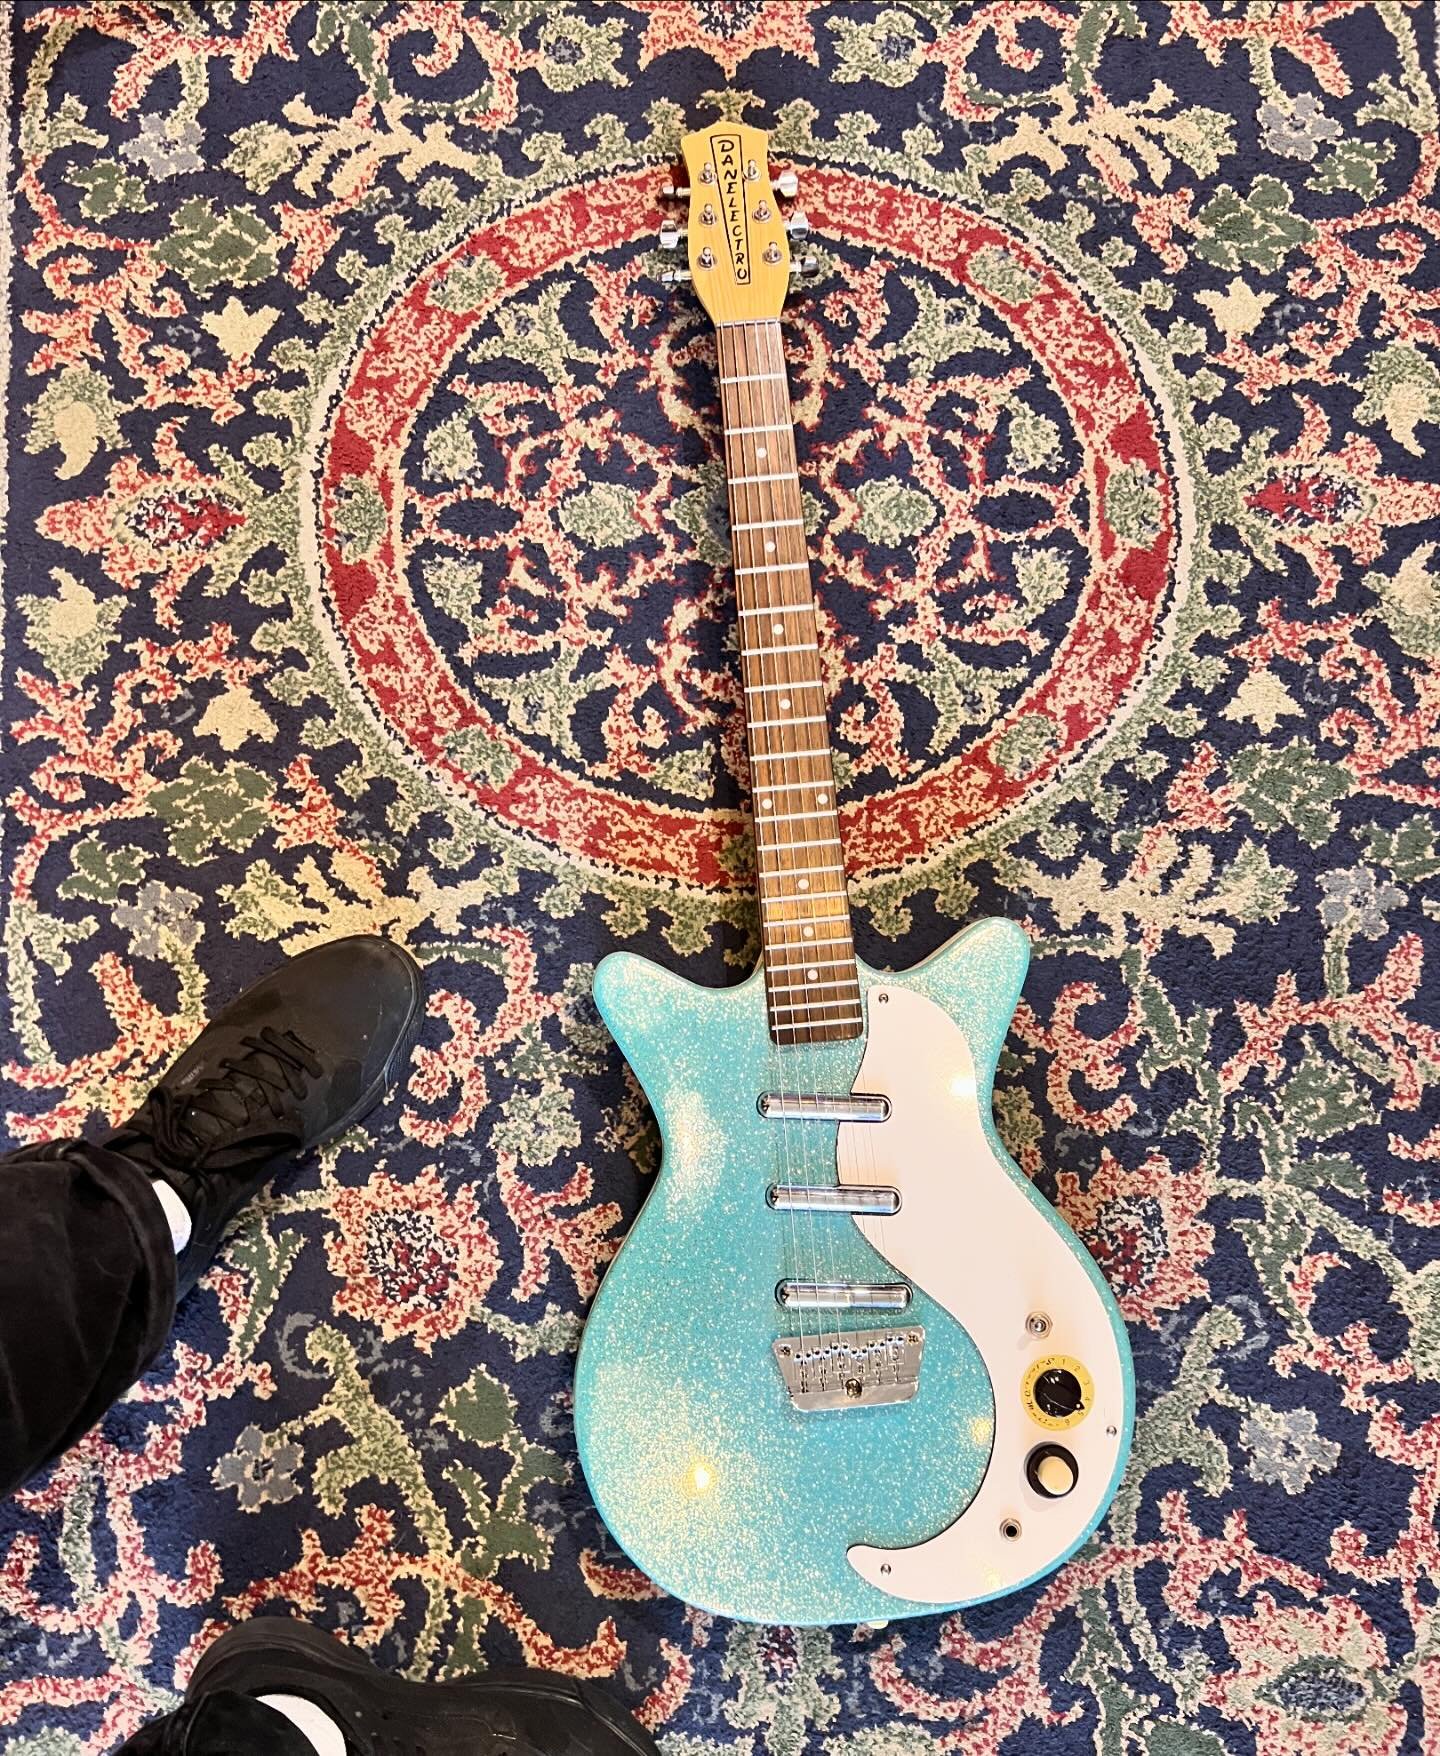 Let&rsquo;s stick with the color theme of the last JM! Here is a kick ass @danelectro_official guitar!!! No idea what model it is but it&rsquo;s versatile and a lot of fun! Come play! #oaklandguitars #danelectroguitars